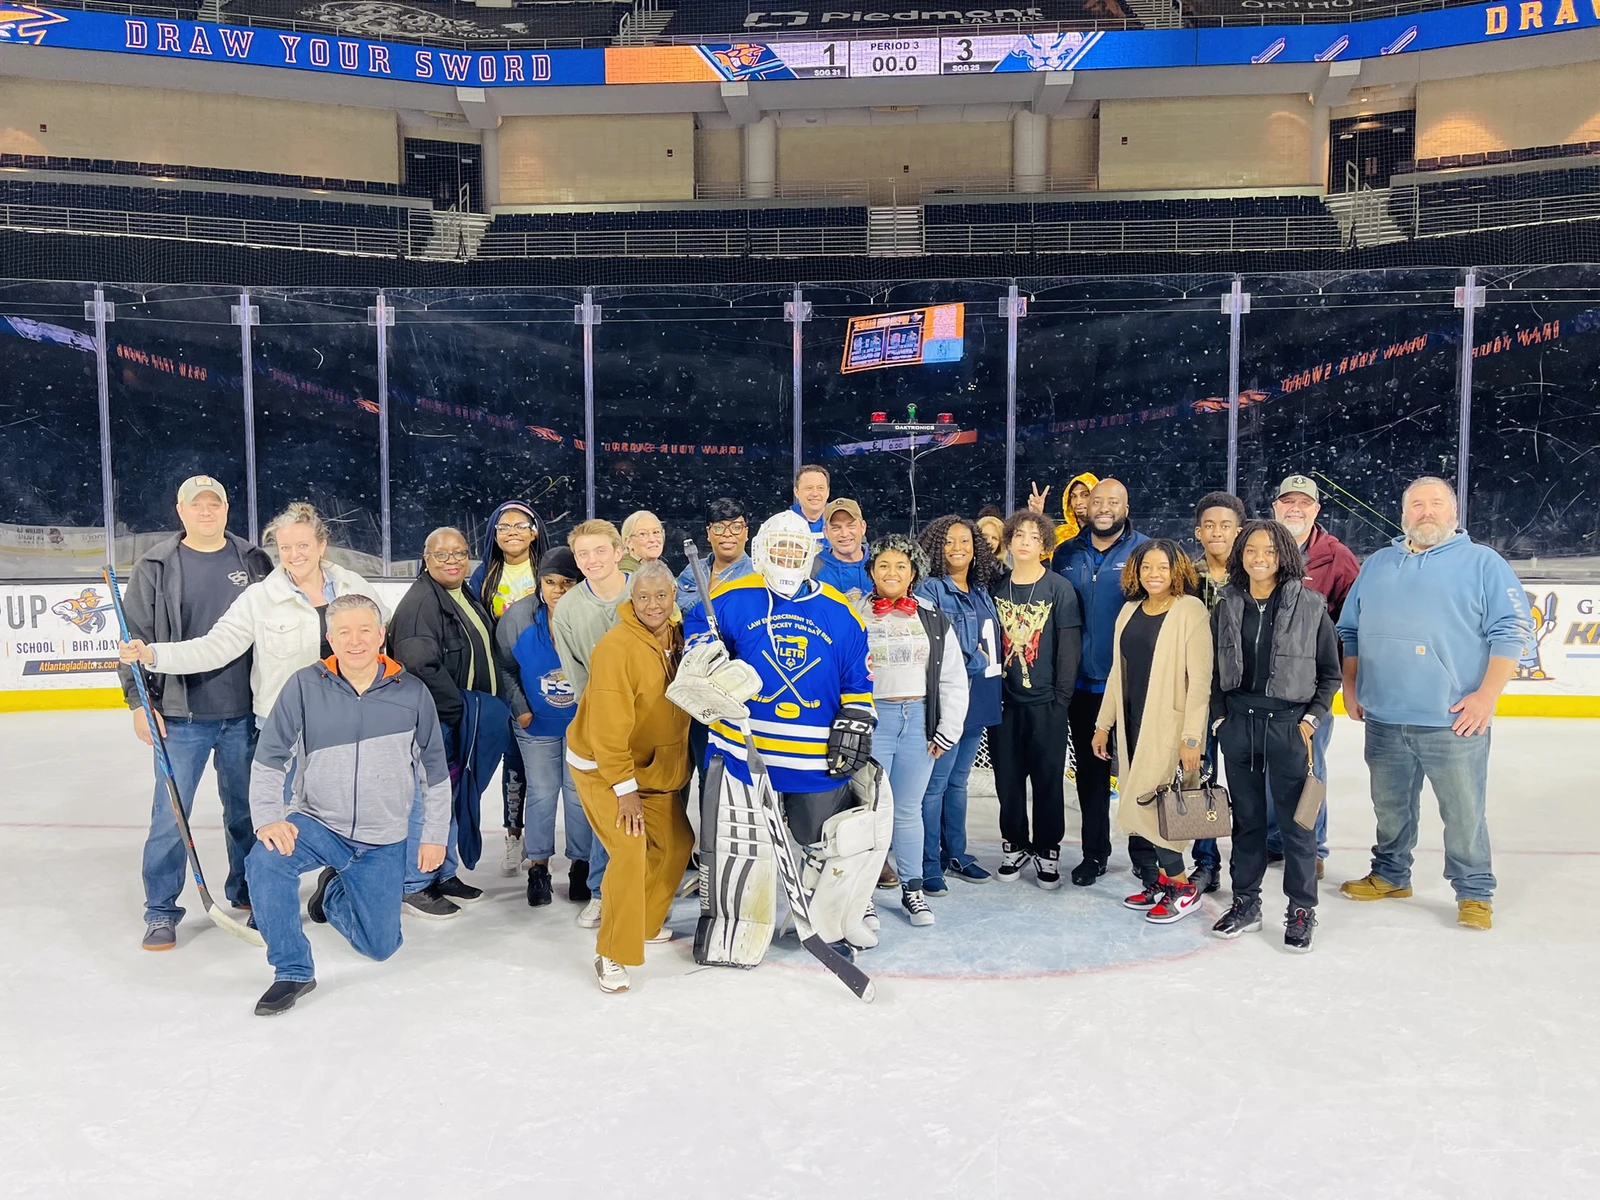 A group of people pose for a photo with a person wearing hockey gear on an ice rink inside a large arena, reminiscent of the precision and teamwork seen in fulfillment centers where every action, from picking to packing, is executed flawlessly.